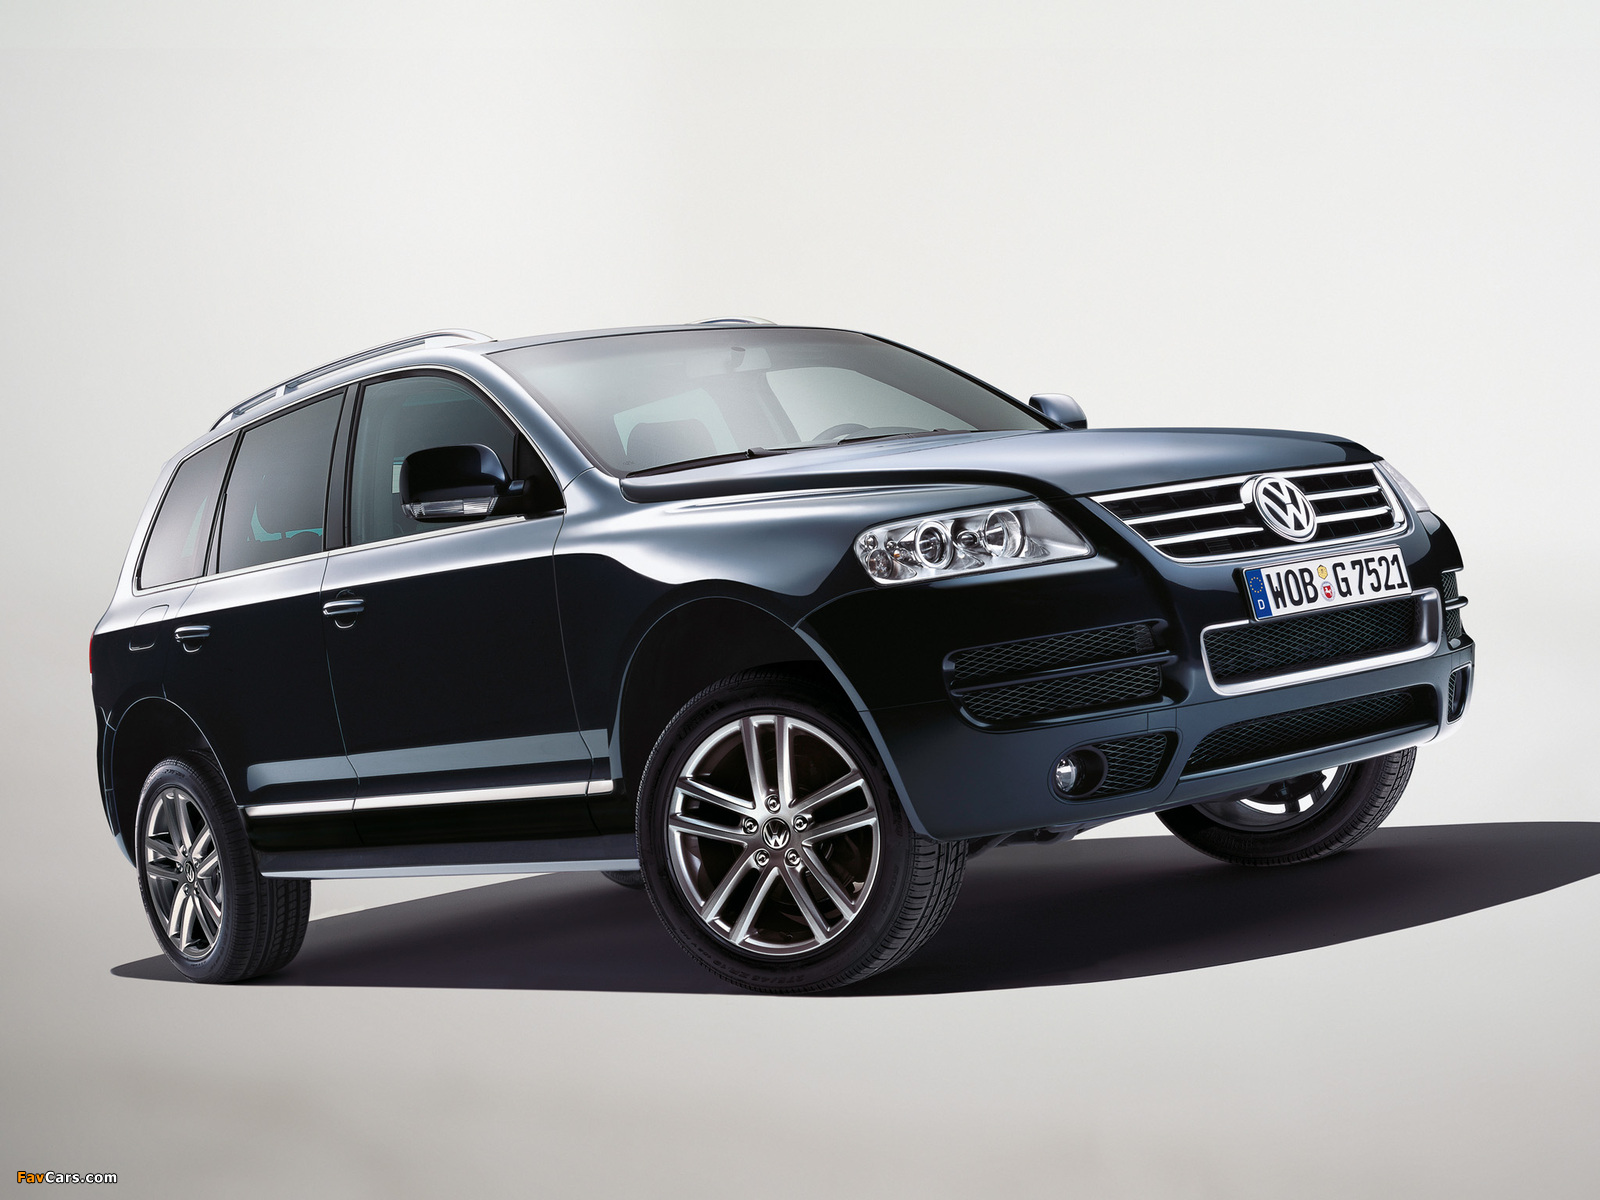 Volkswagen Touareg Exclusive Edition 2006 pictures (1600 x 1200)